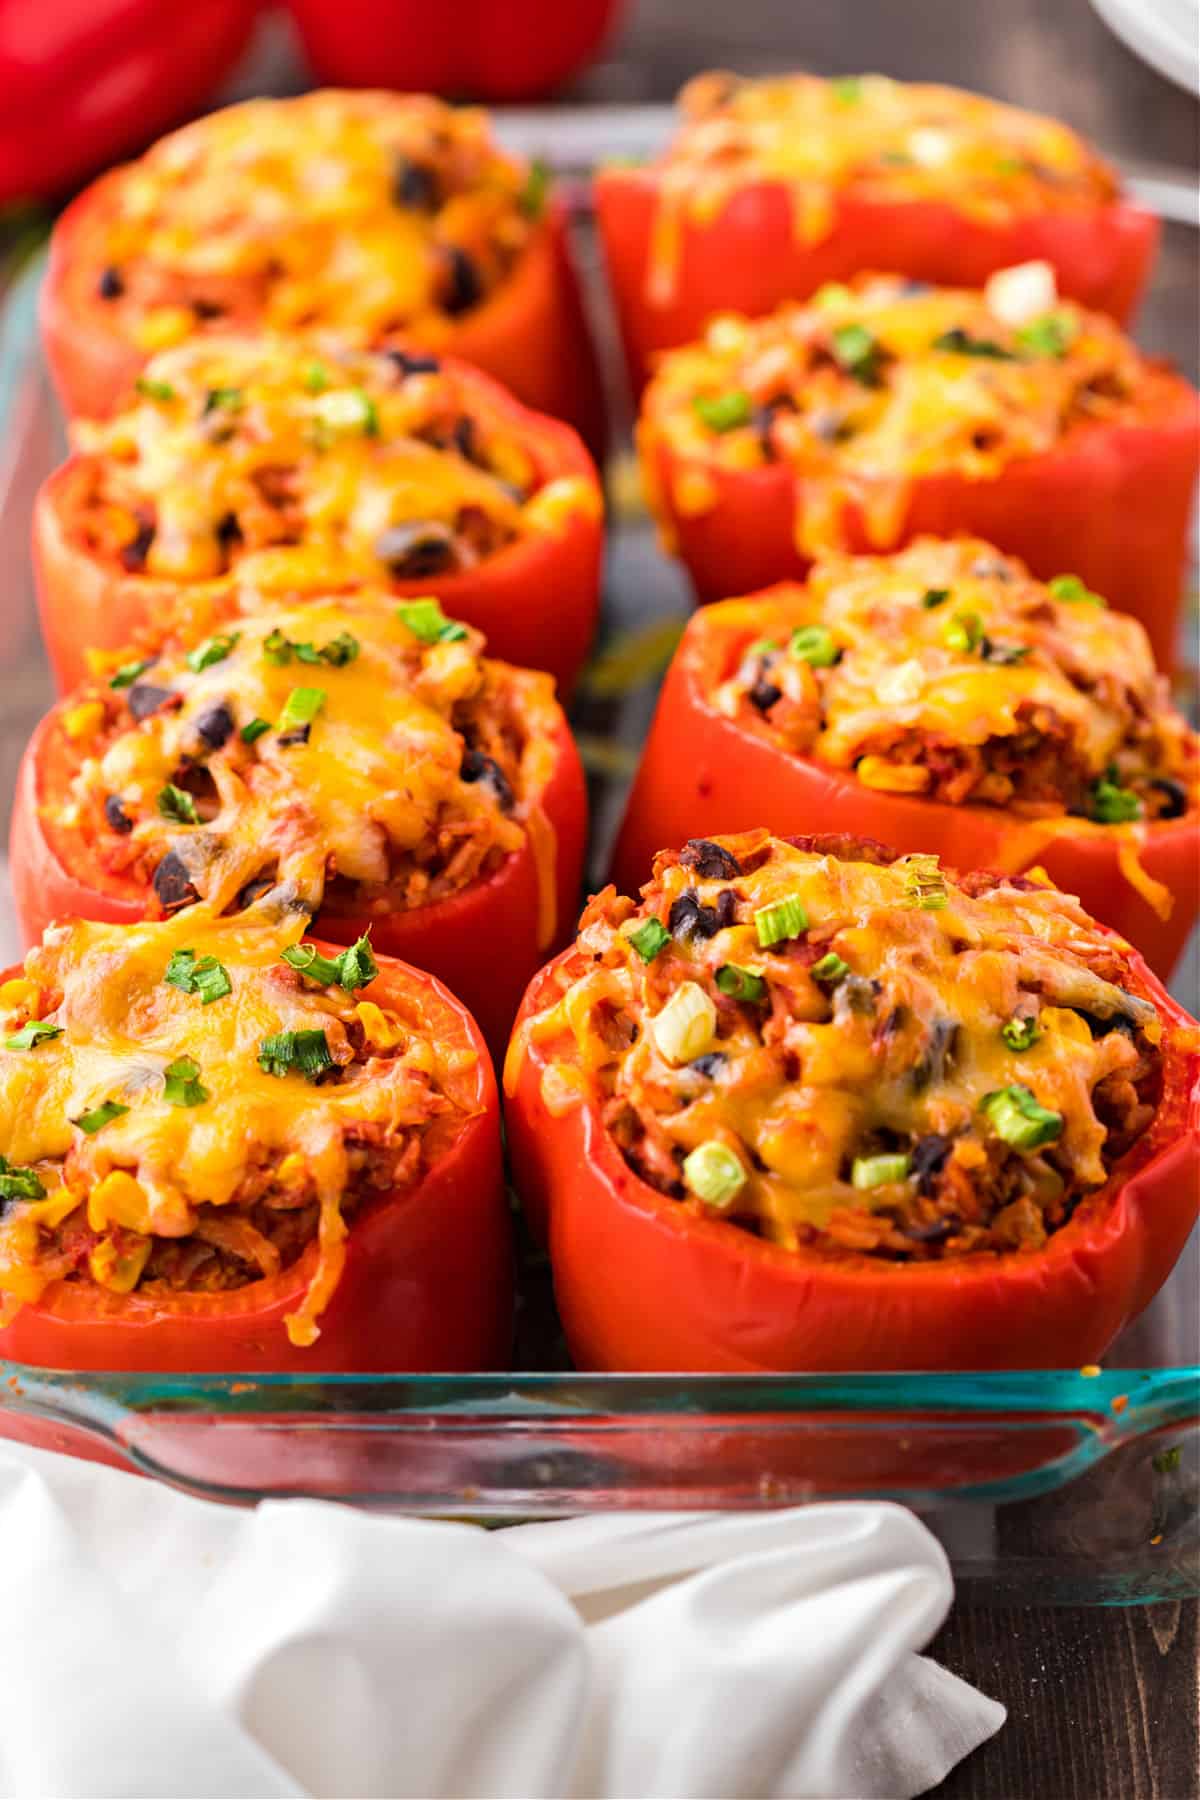 Stuffed peppers with a mexican filling and topped with melted cheese.